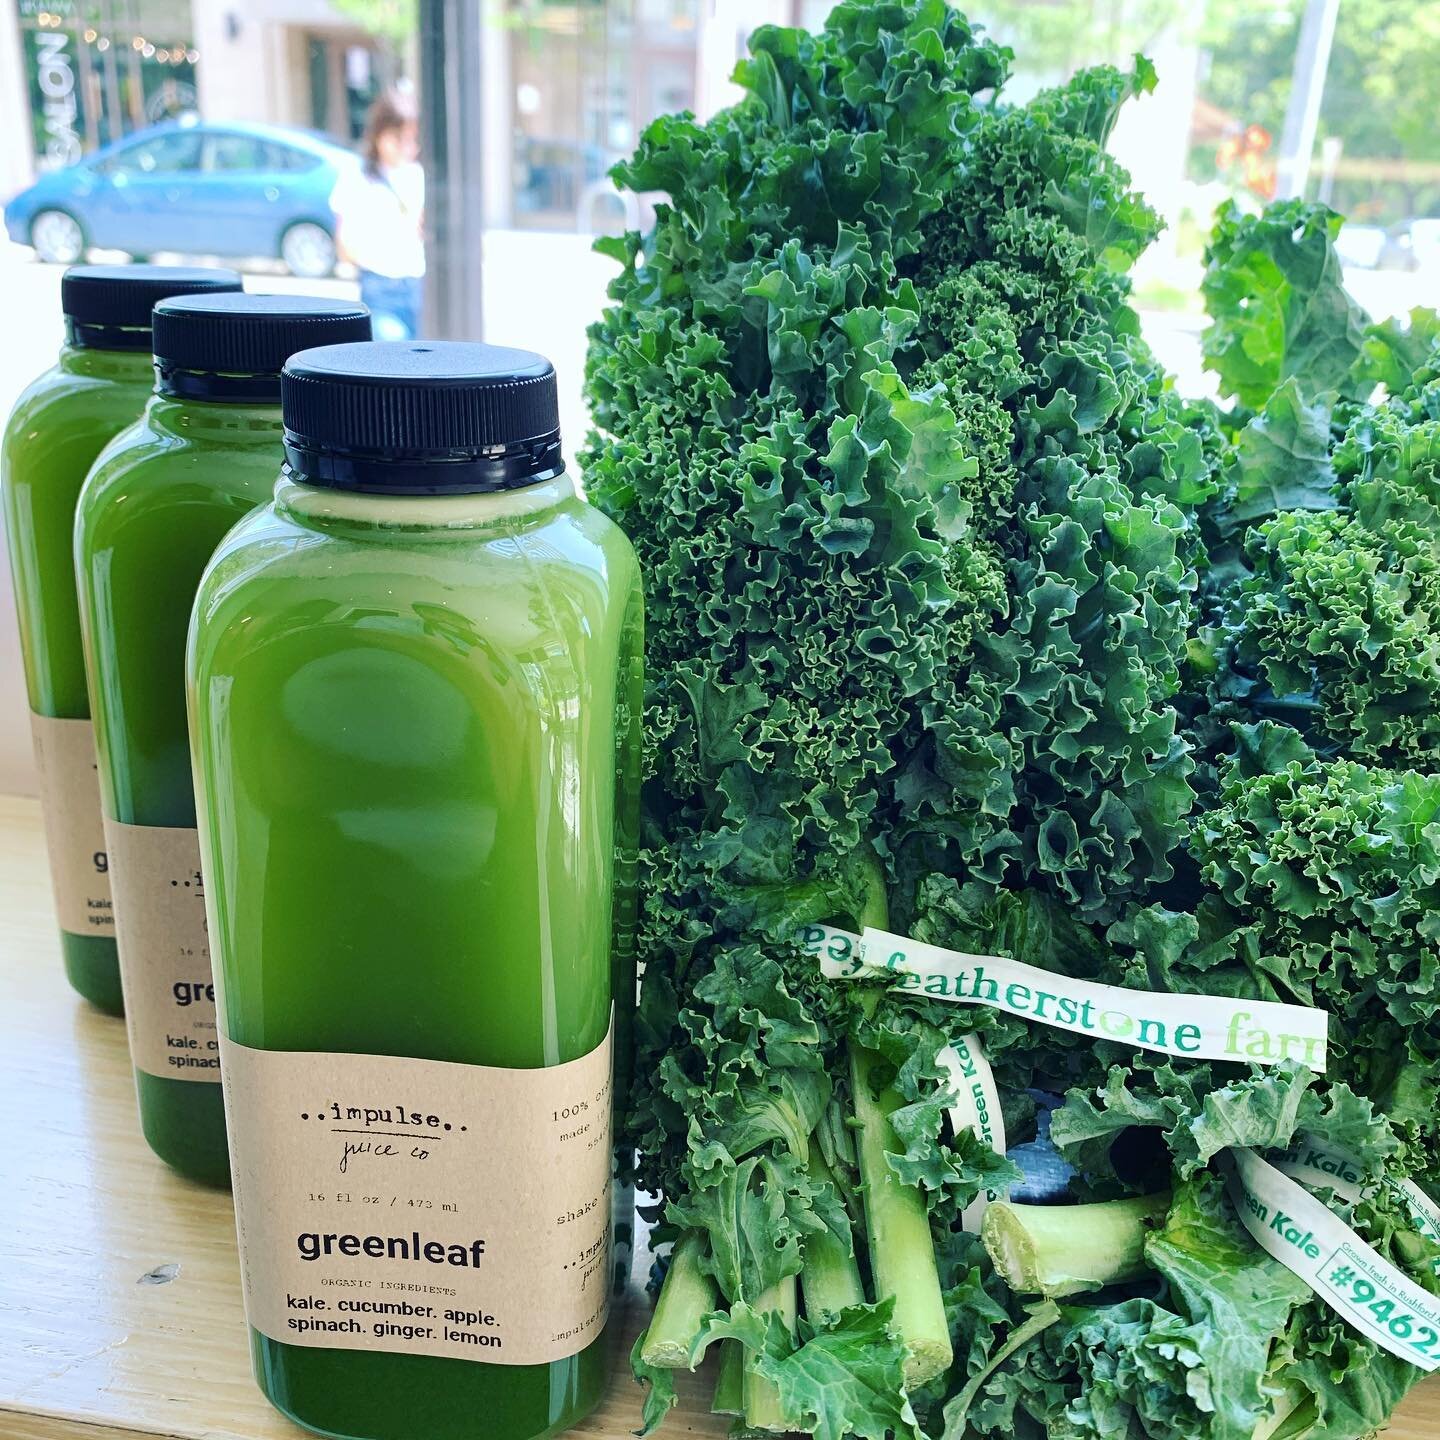 this might be our tastiest batch of greenleaf yet, thanks to the kale being from @featherstonefarmmn 

something about that air and soil in rushford, mn... 💚